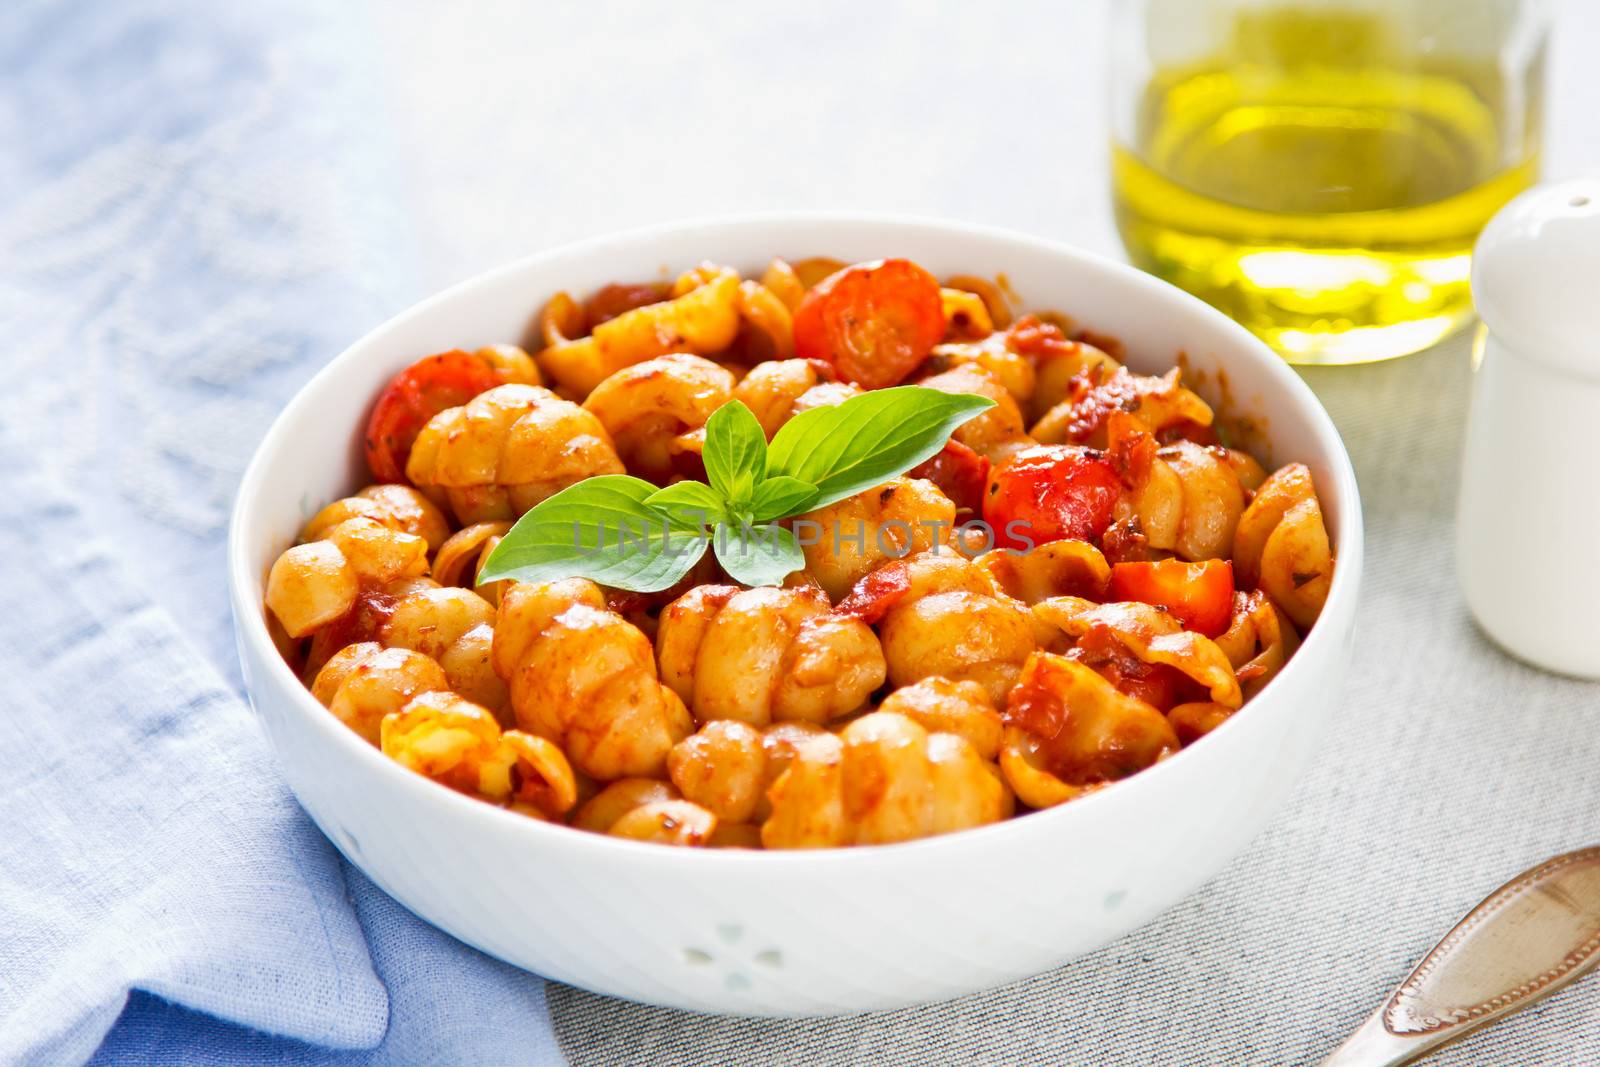 Gnocchi with tomato sauce by vanillaechoes